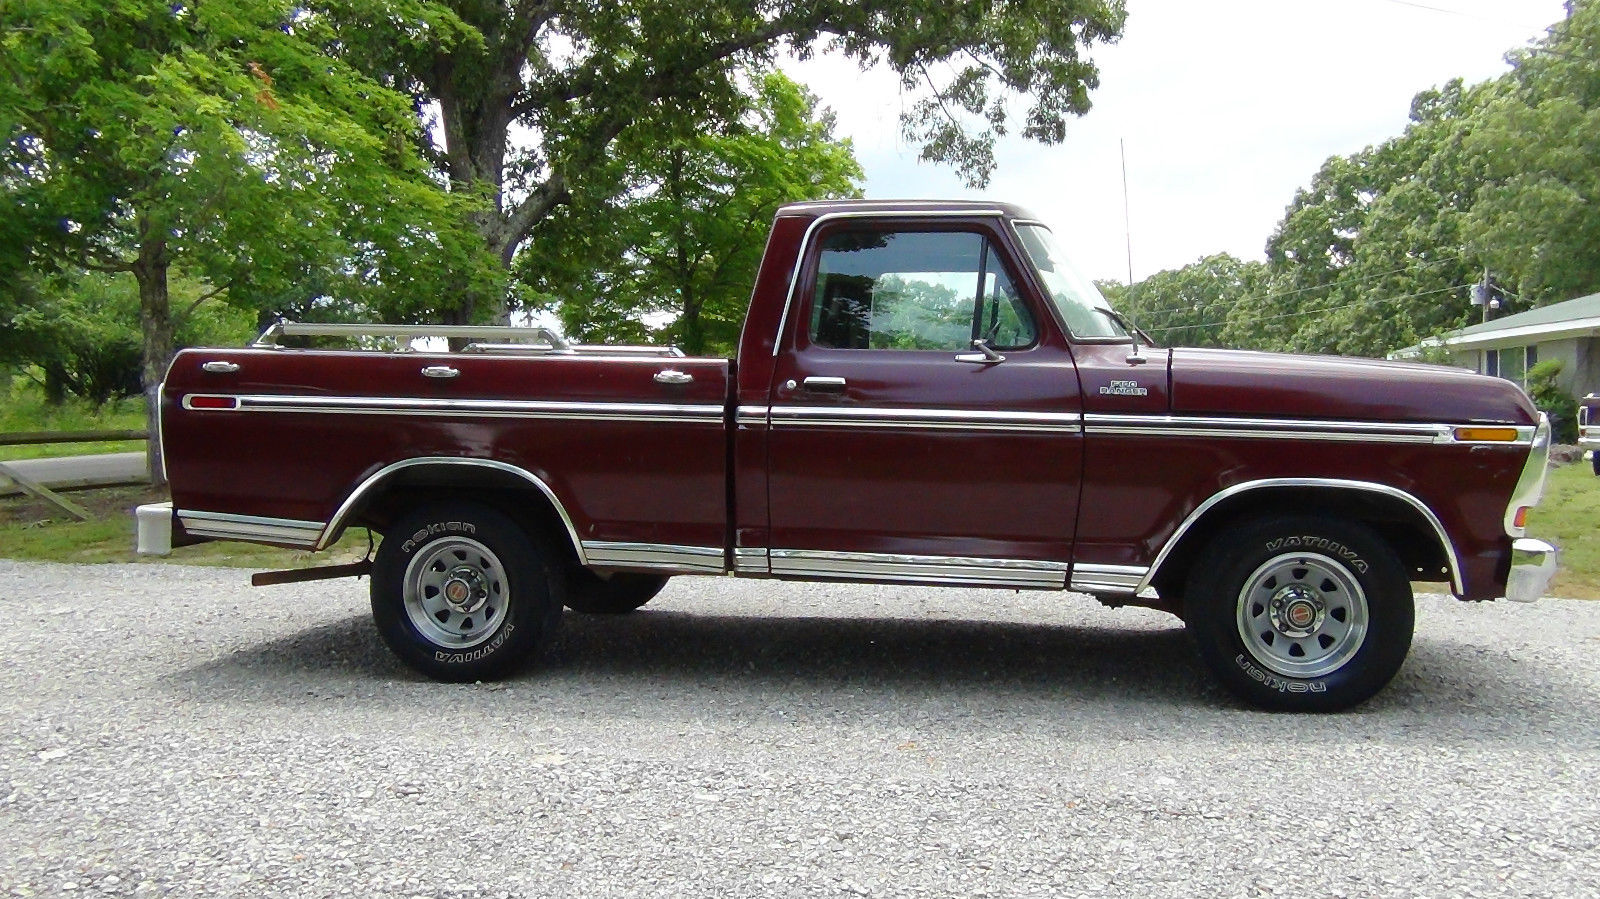 All American Classic Cars: 1979 Ford F100 Ranger Pickup Truck